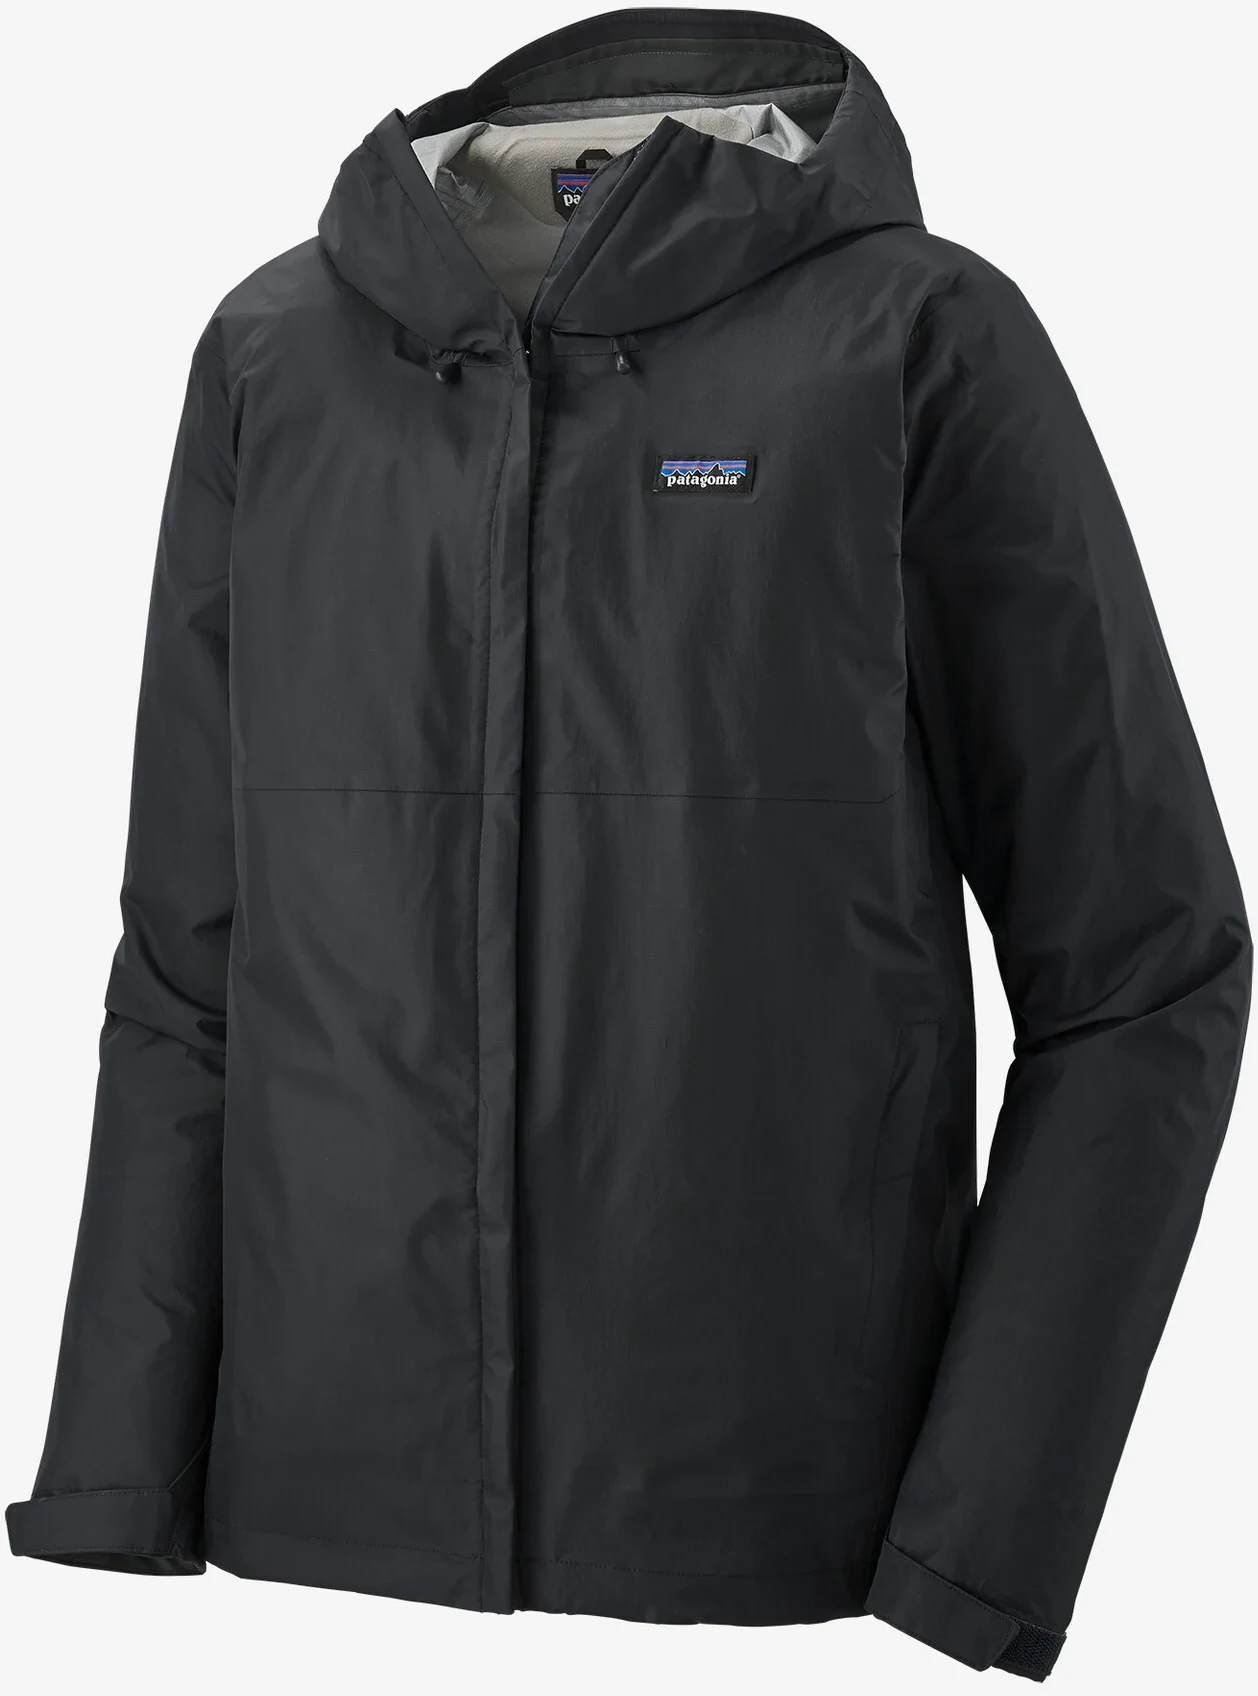 Unlock Wilderness' choice in the Patagonia Vs Mammut comparison, the Torrentshell 3L Jacket by Patagonia